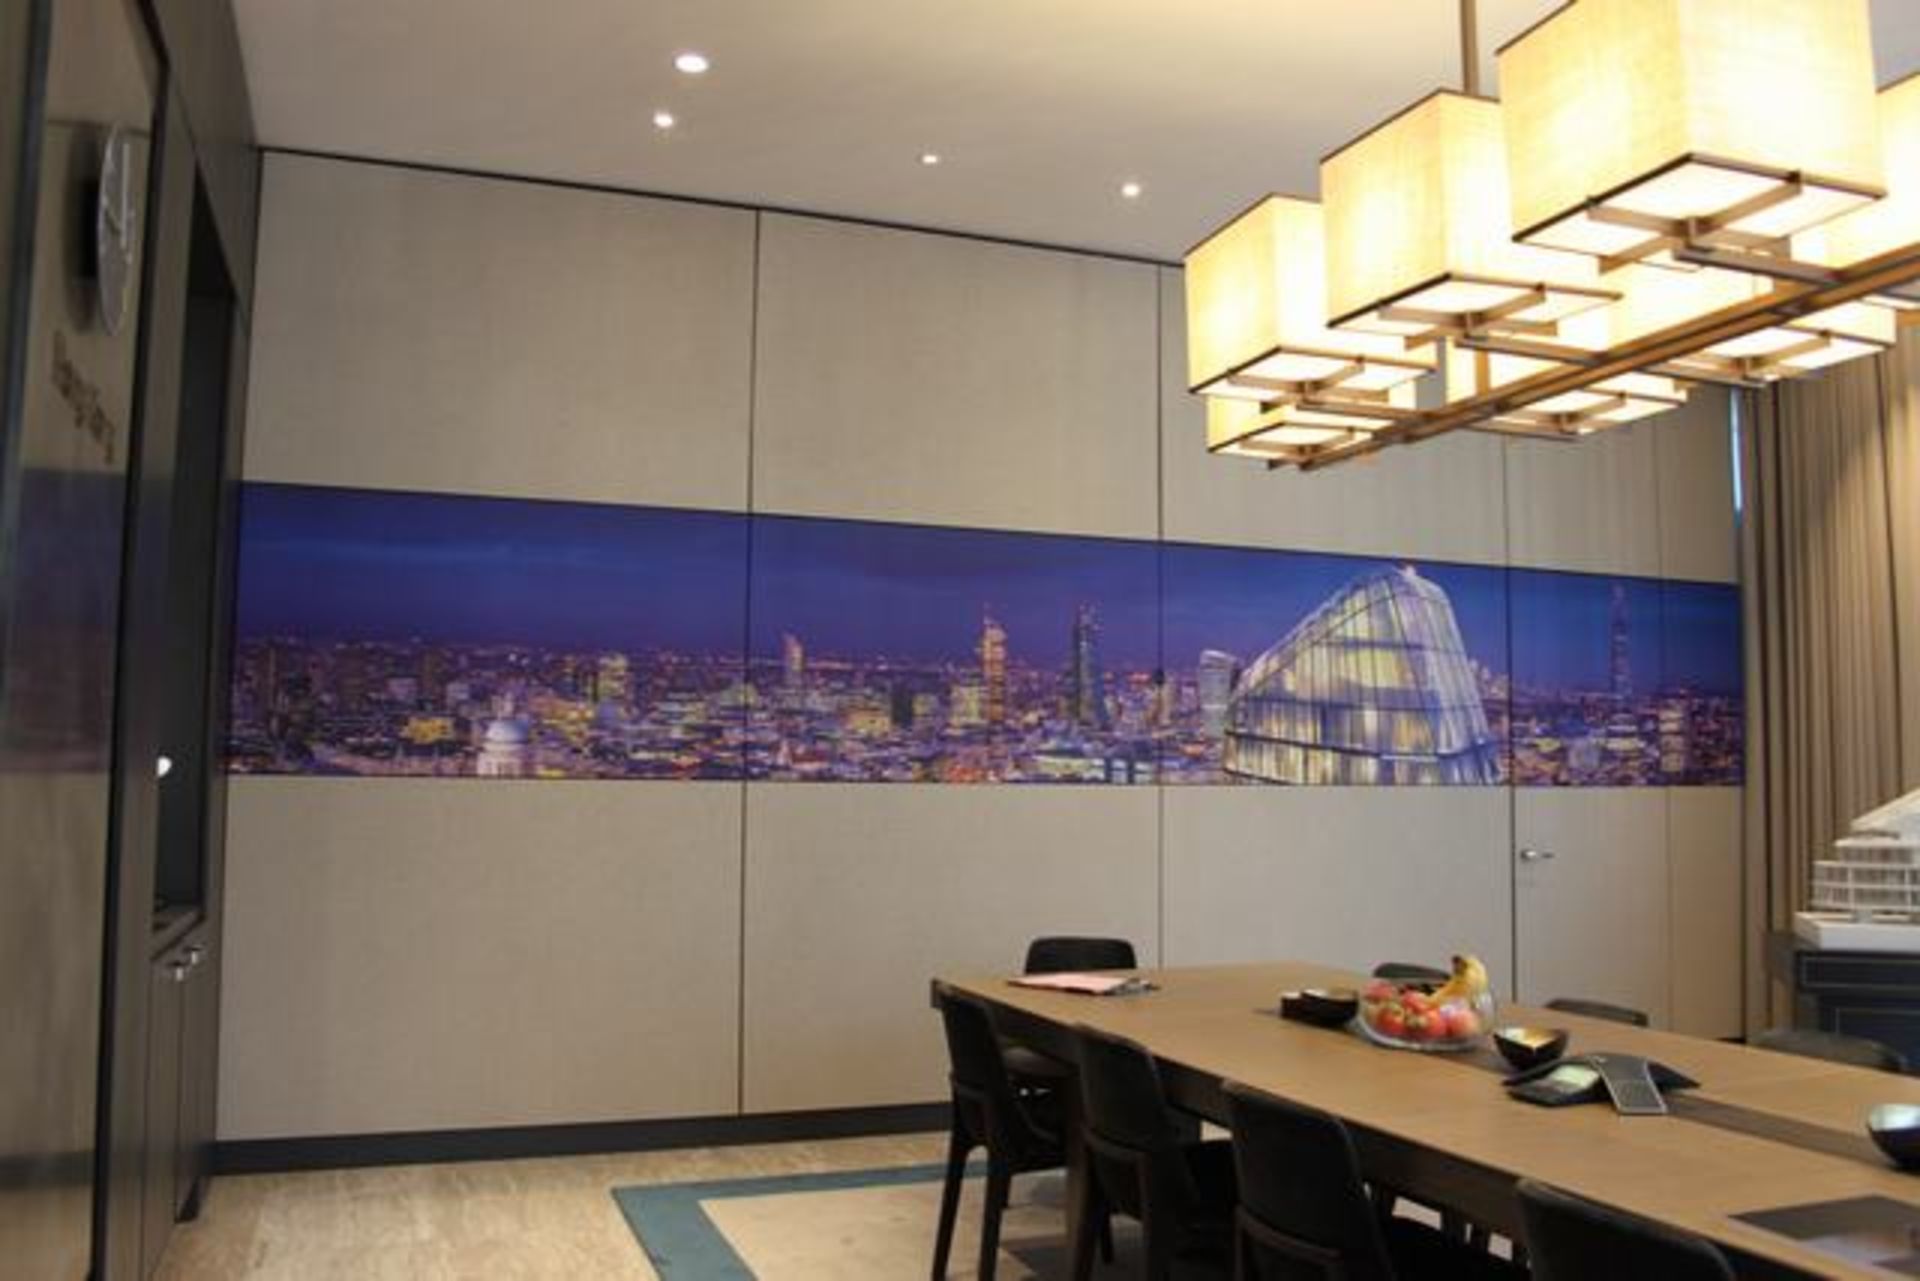 Wall cladding panelling and art effect panels 1740mm x 1190mm x 6 panels and 1740mm x 960mm art - Image 2 of 2